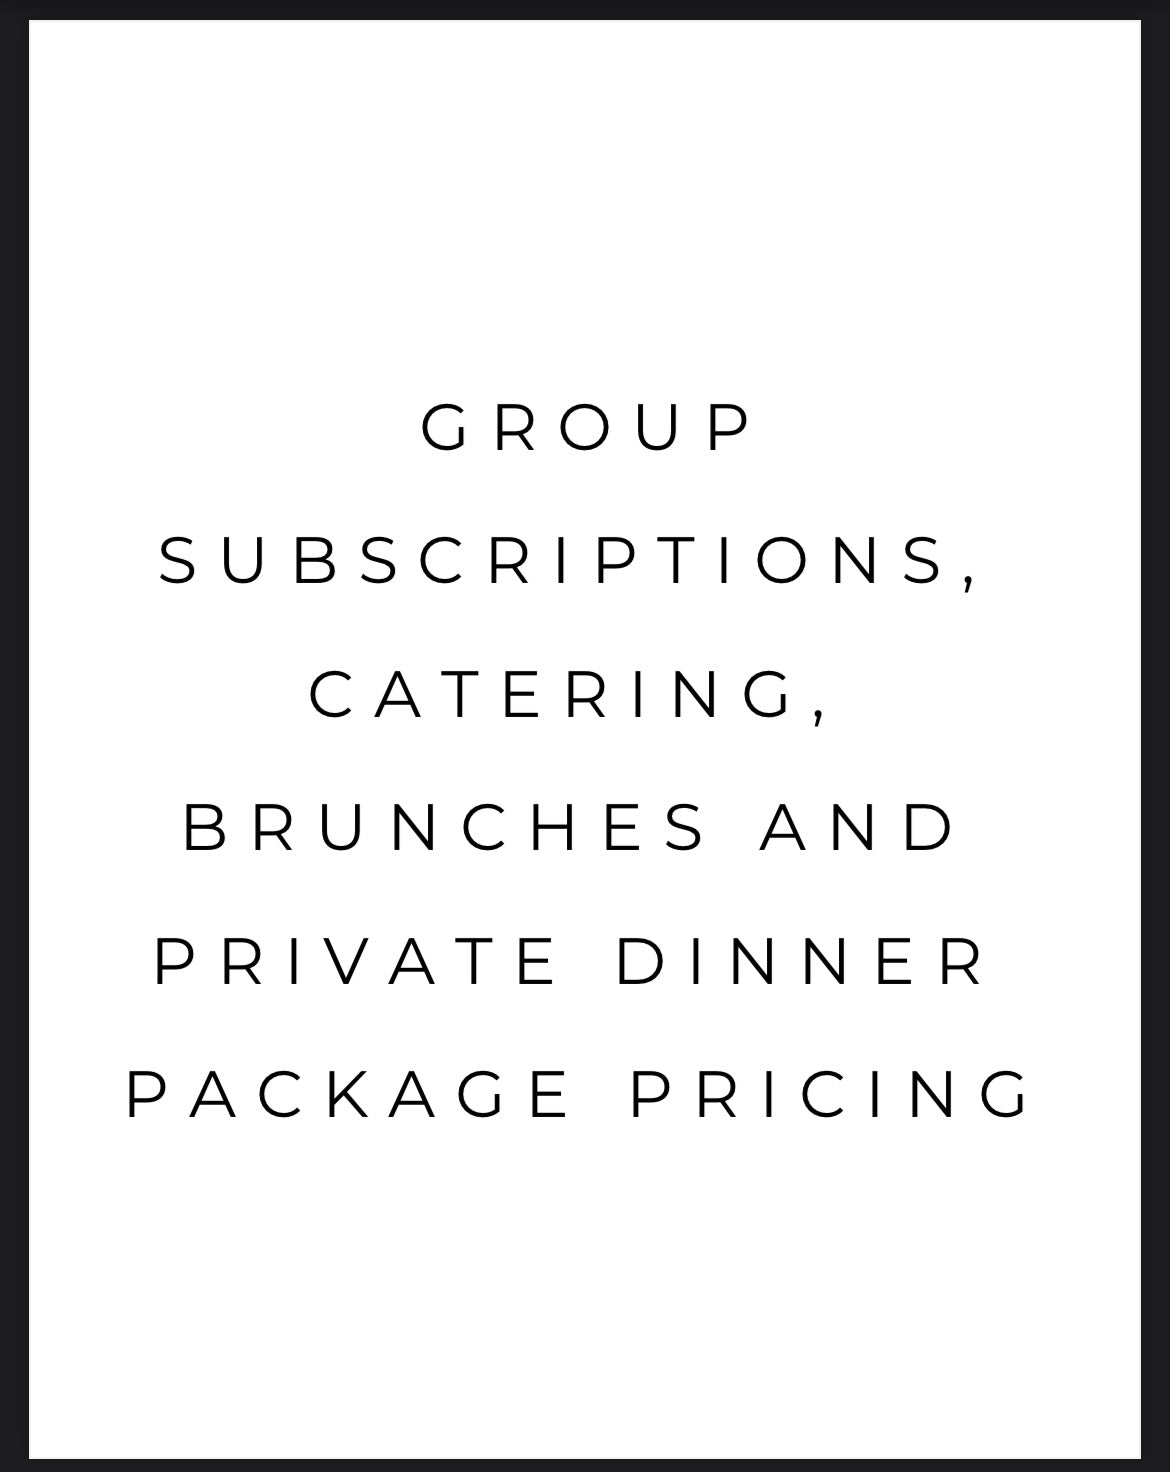 Group and Corporate Packages